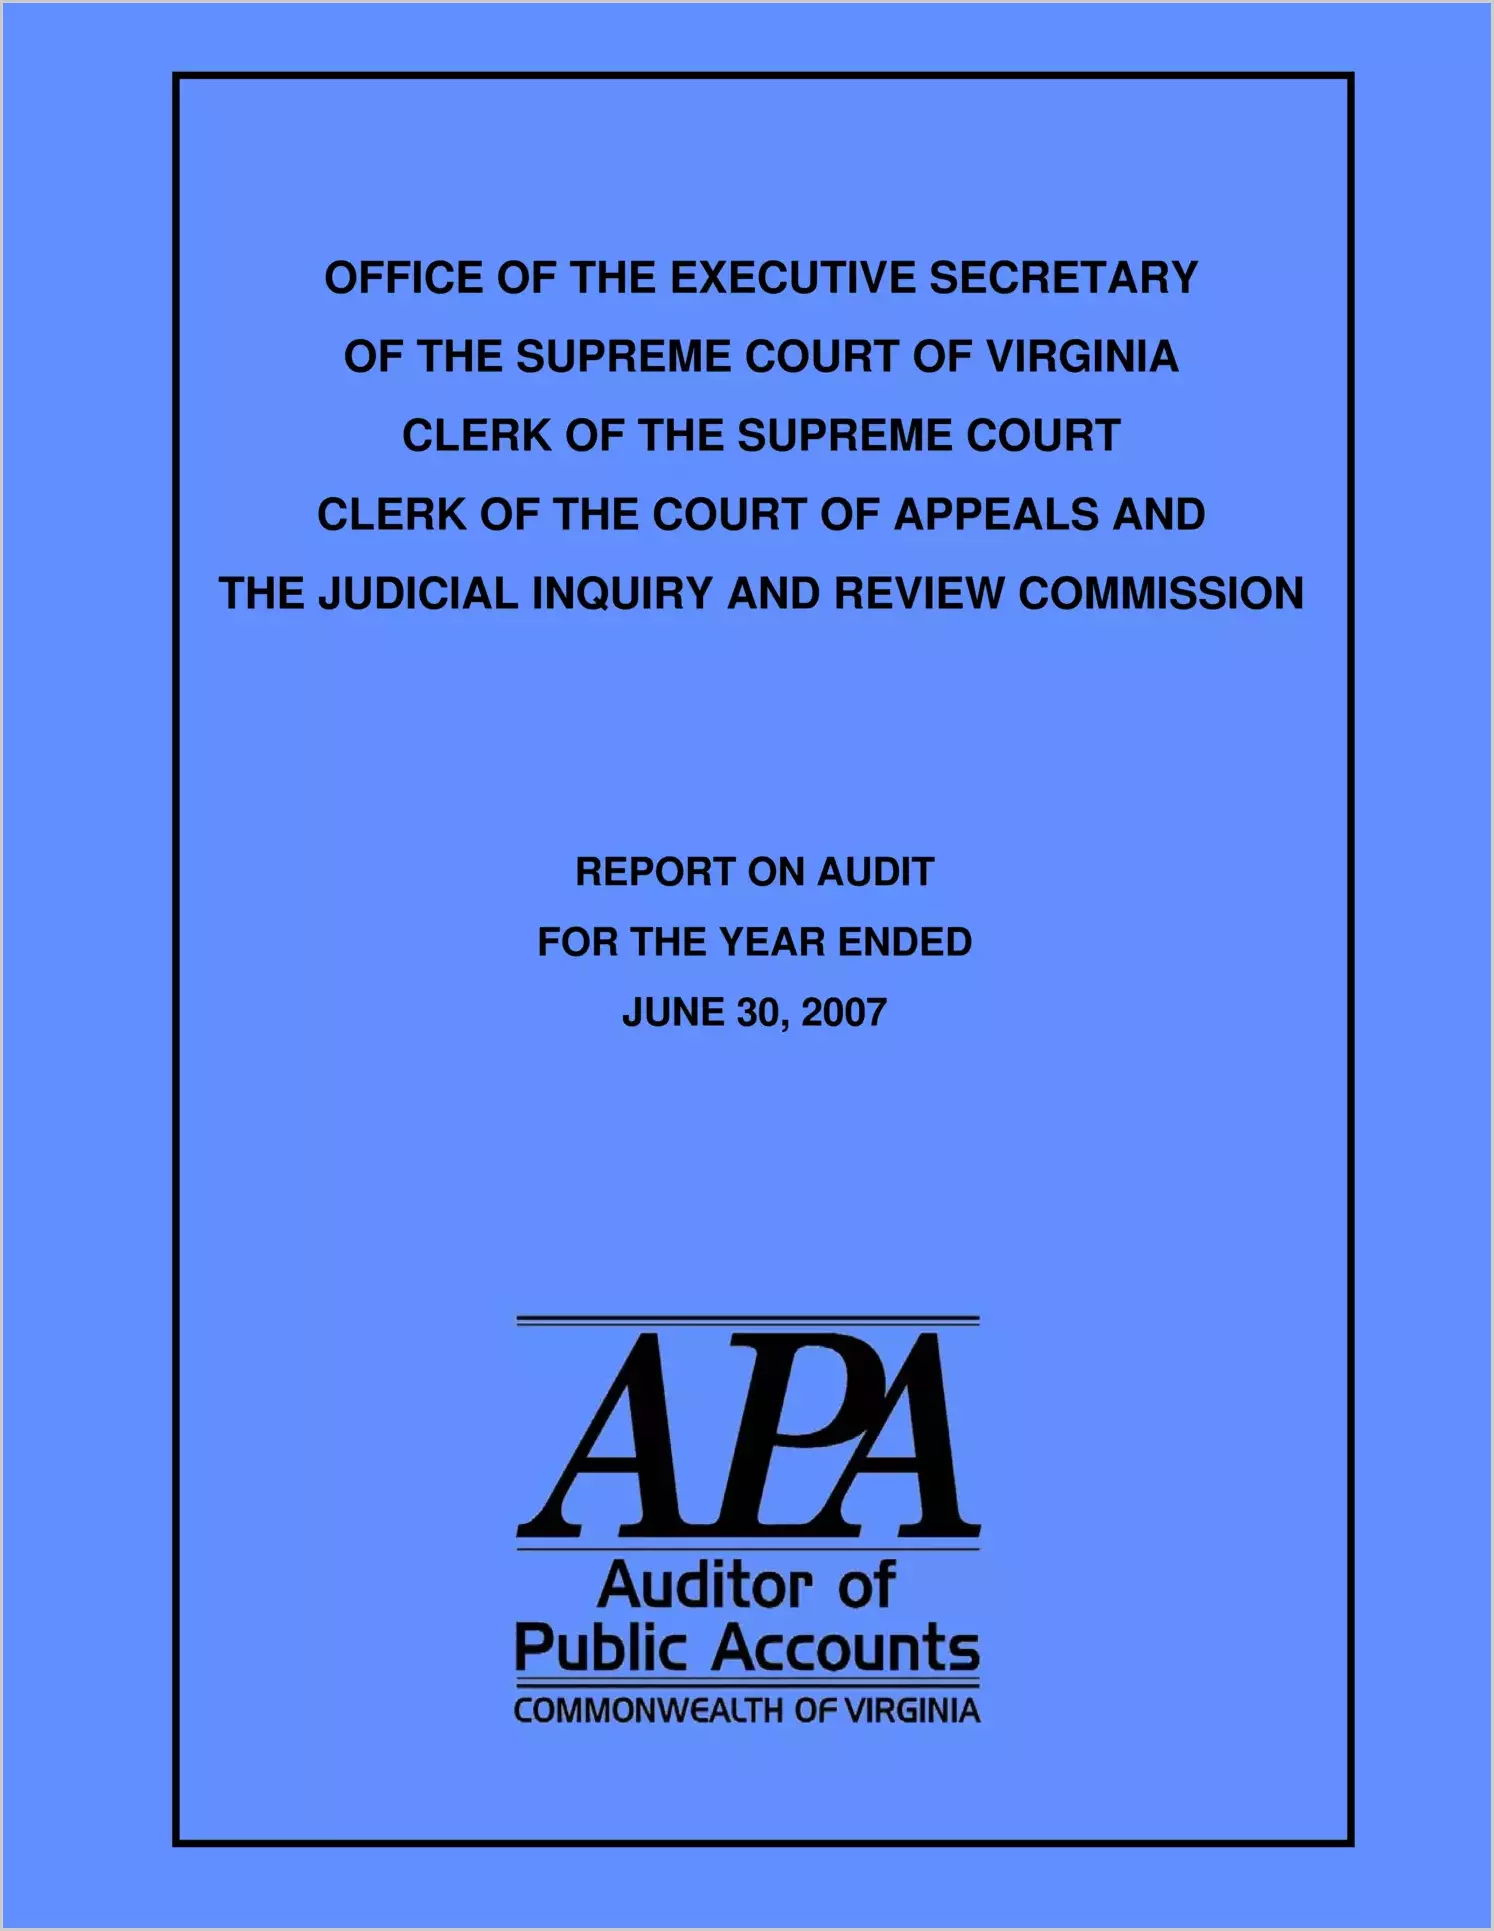 Office of the Executive Secretary of the Supreme Court of Virginia, Clerk of the Supreme  Court, Clerk of the Court of Appeals, and The Judicial Inquiry and Review Commission report on audit fo rthe year ended June 30, 2007